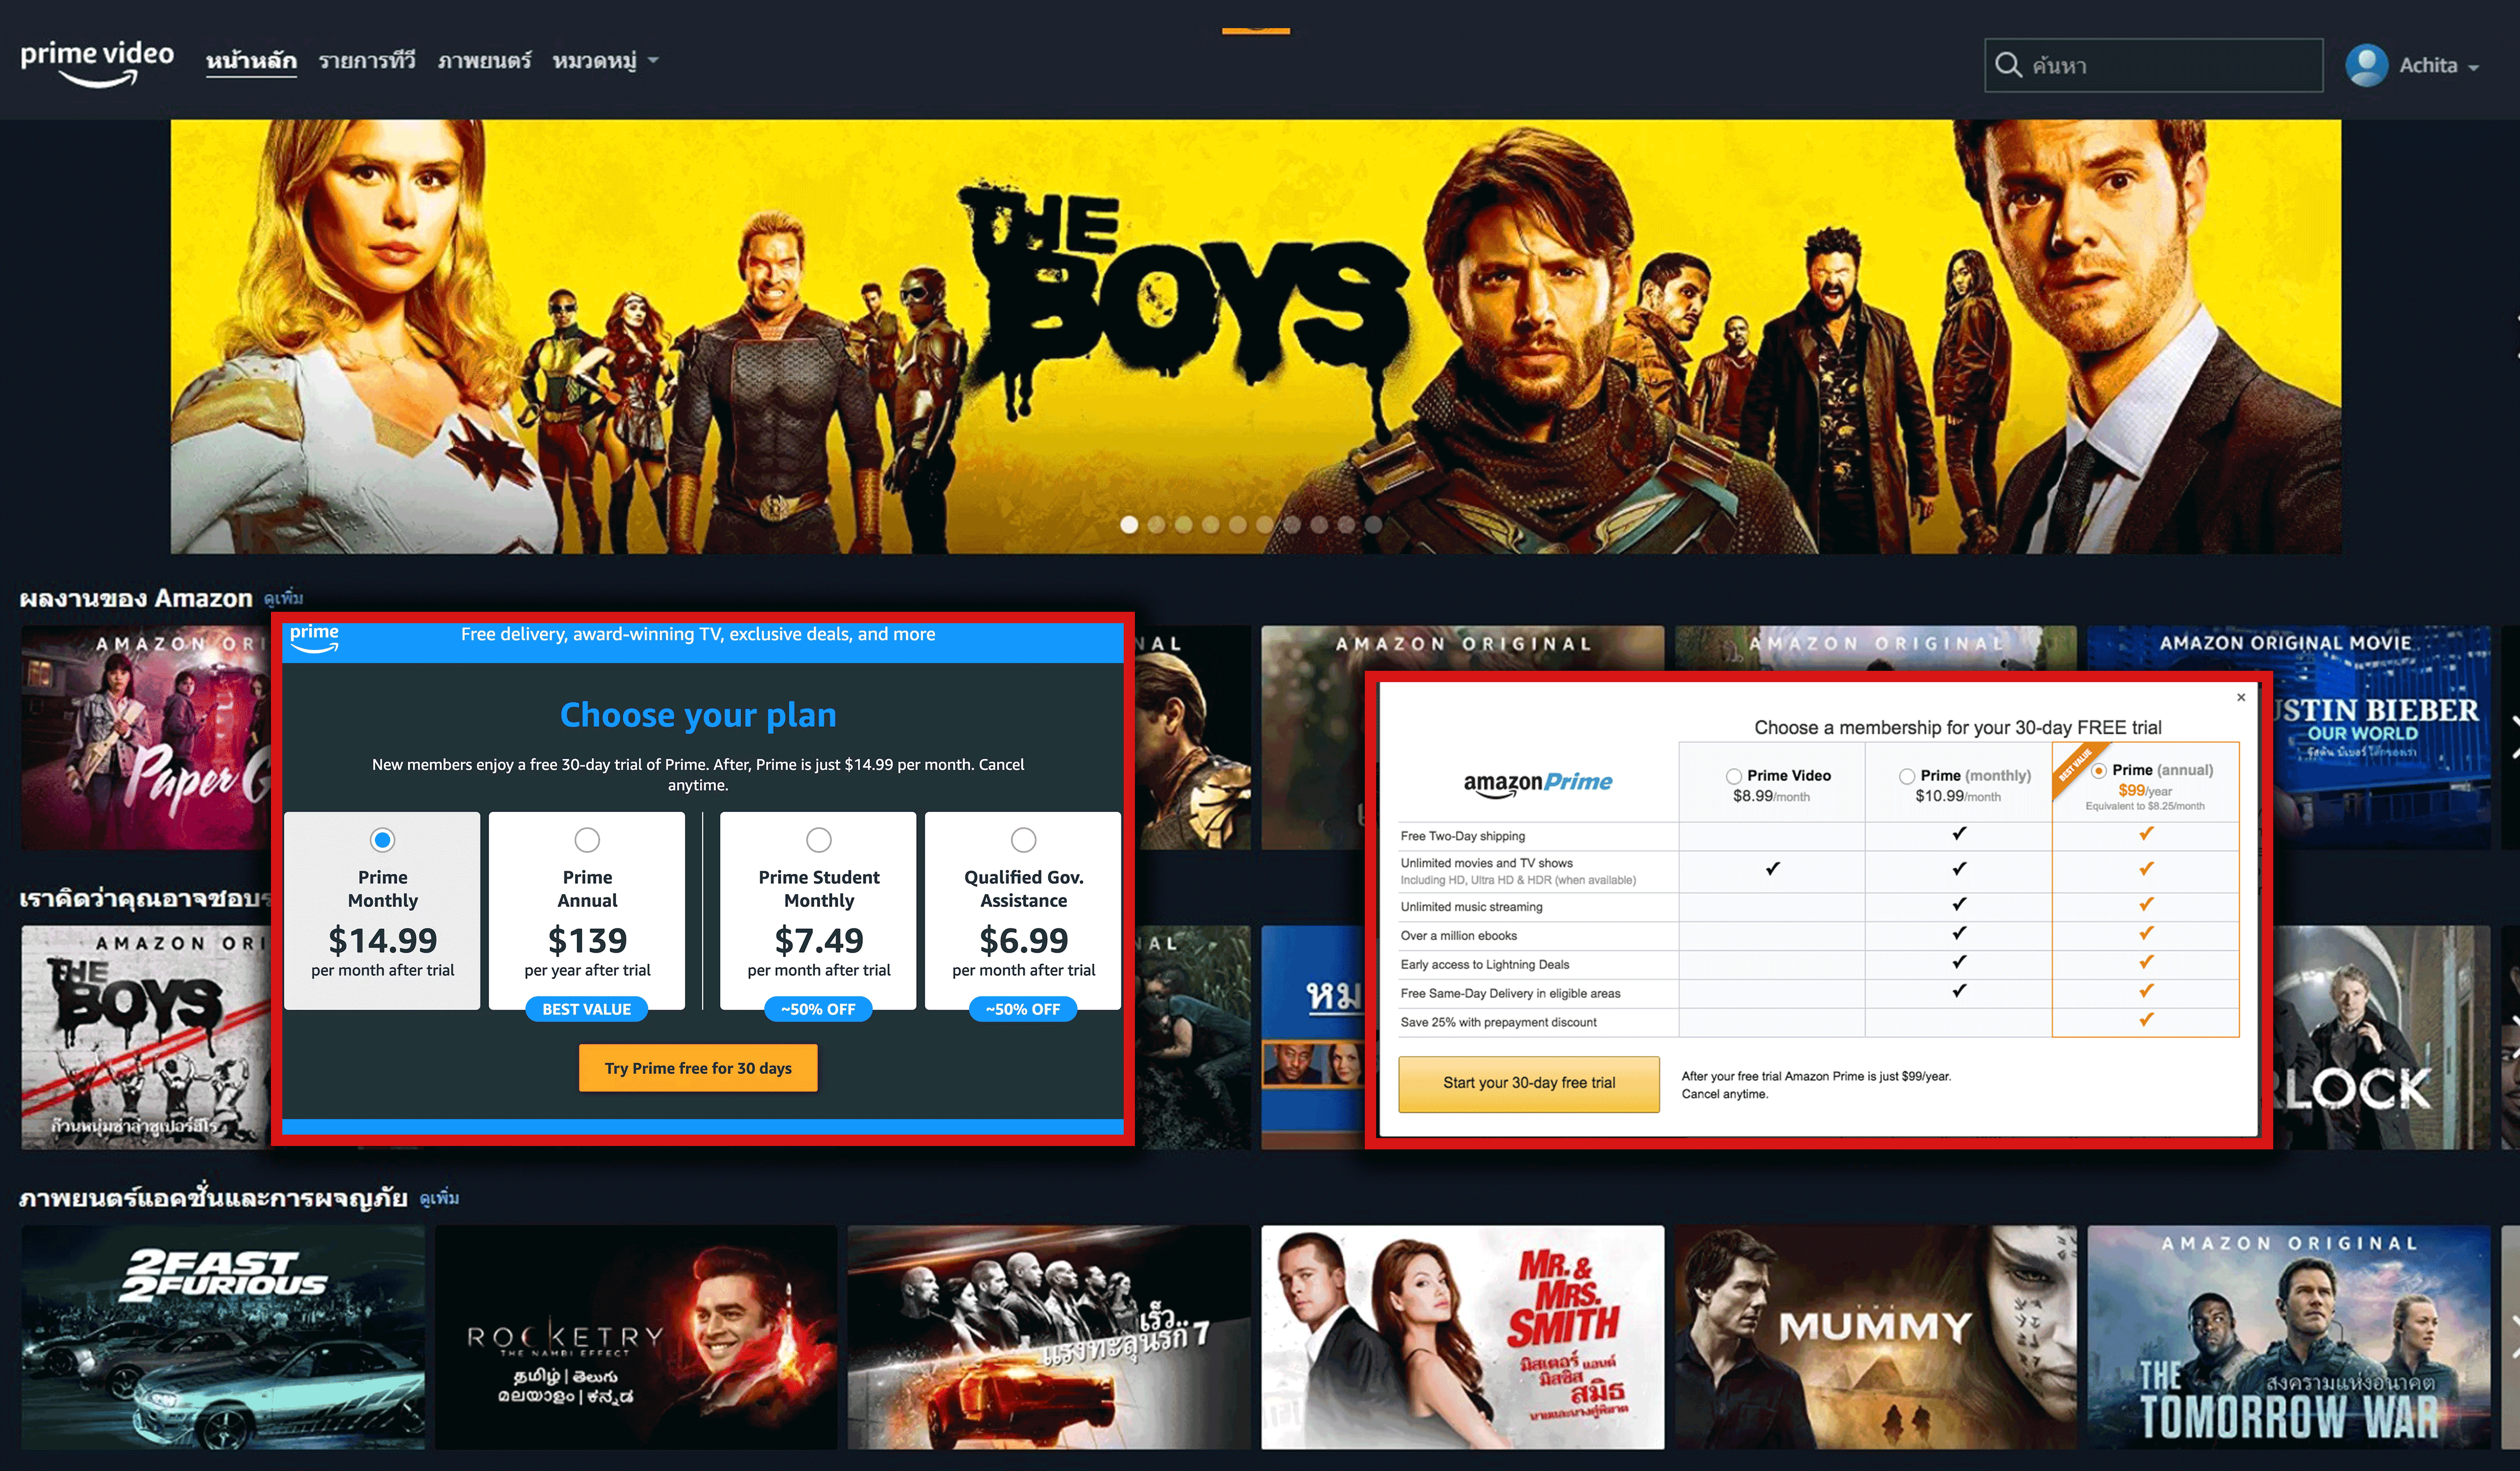 Extract-Buying-and-Rental-Options-of-Chosen-Streaming-Amazon-Prime-Video-Movies-as-well-as-TV-Shows